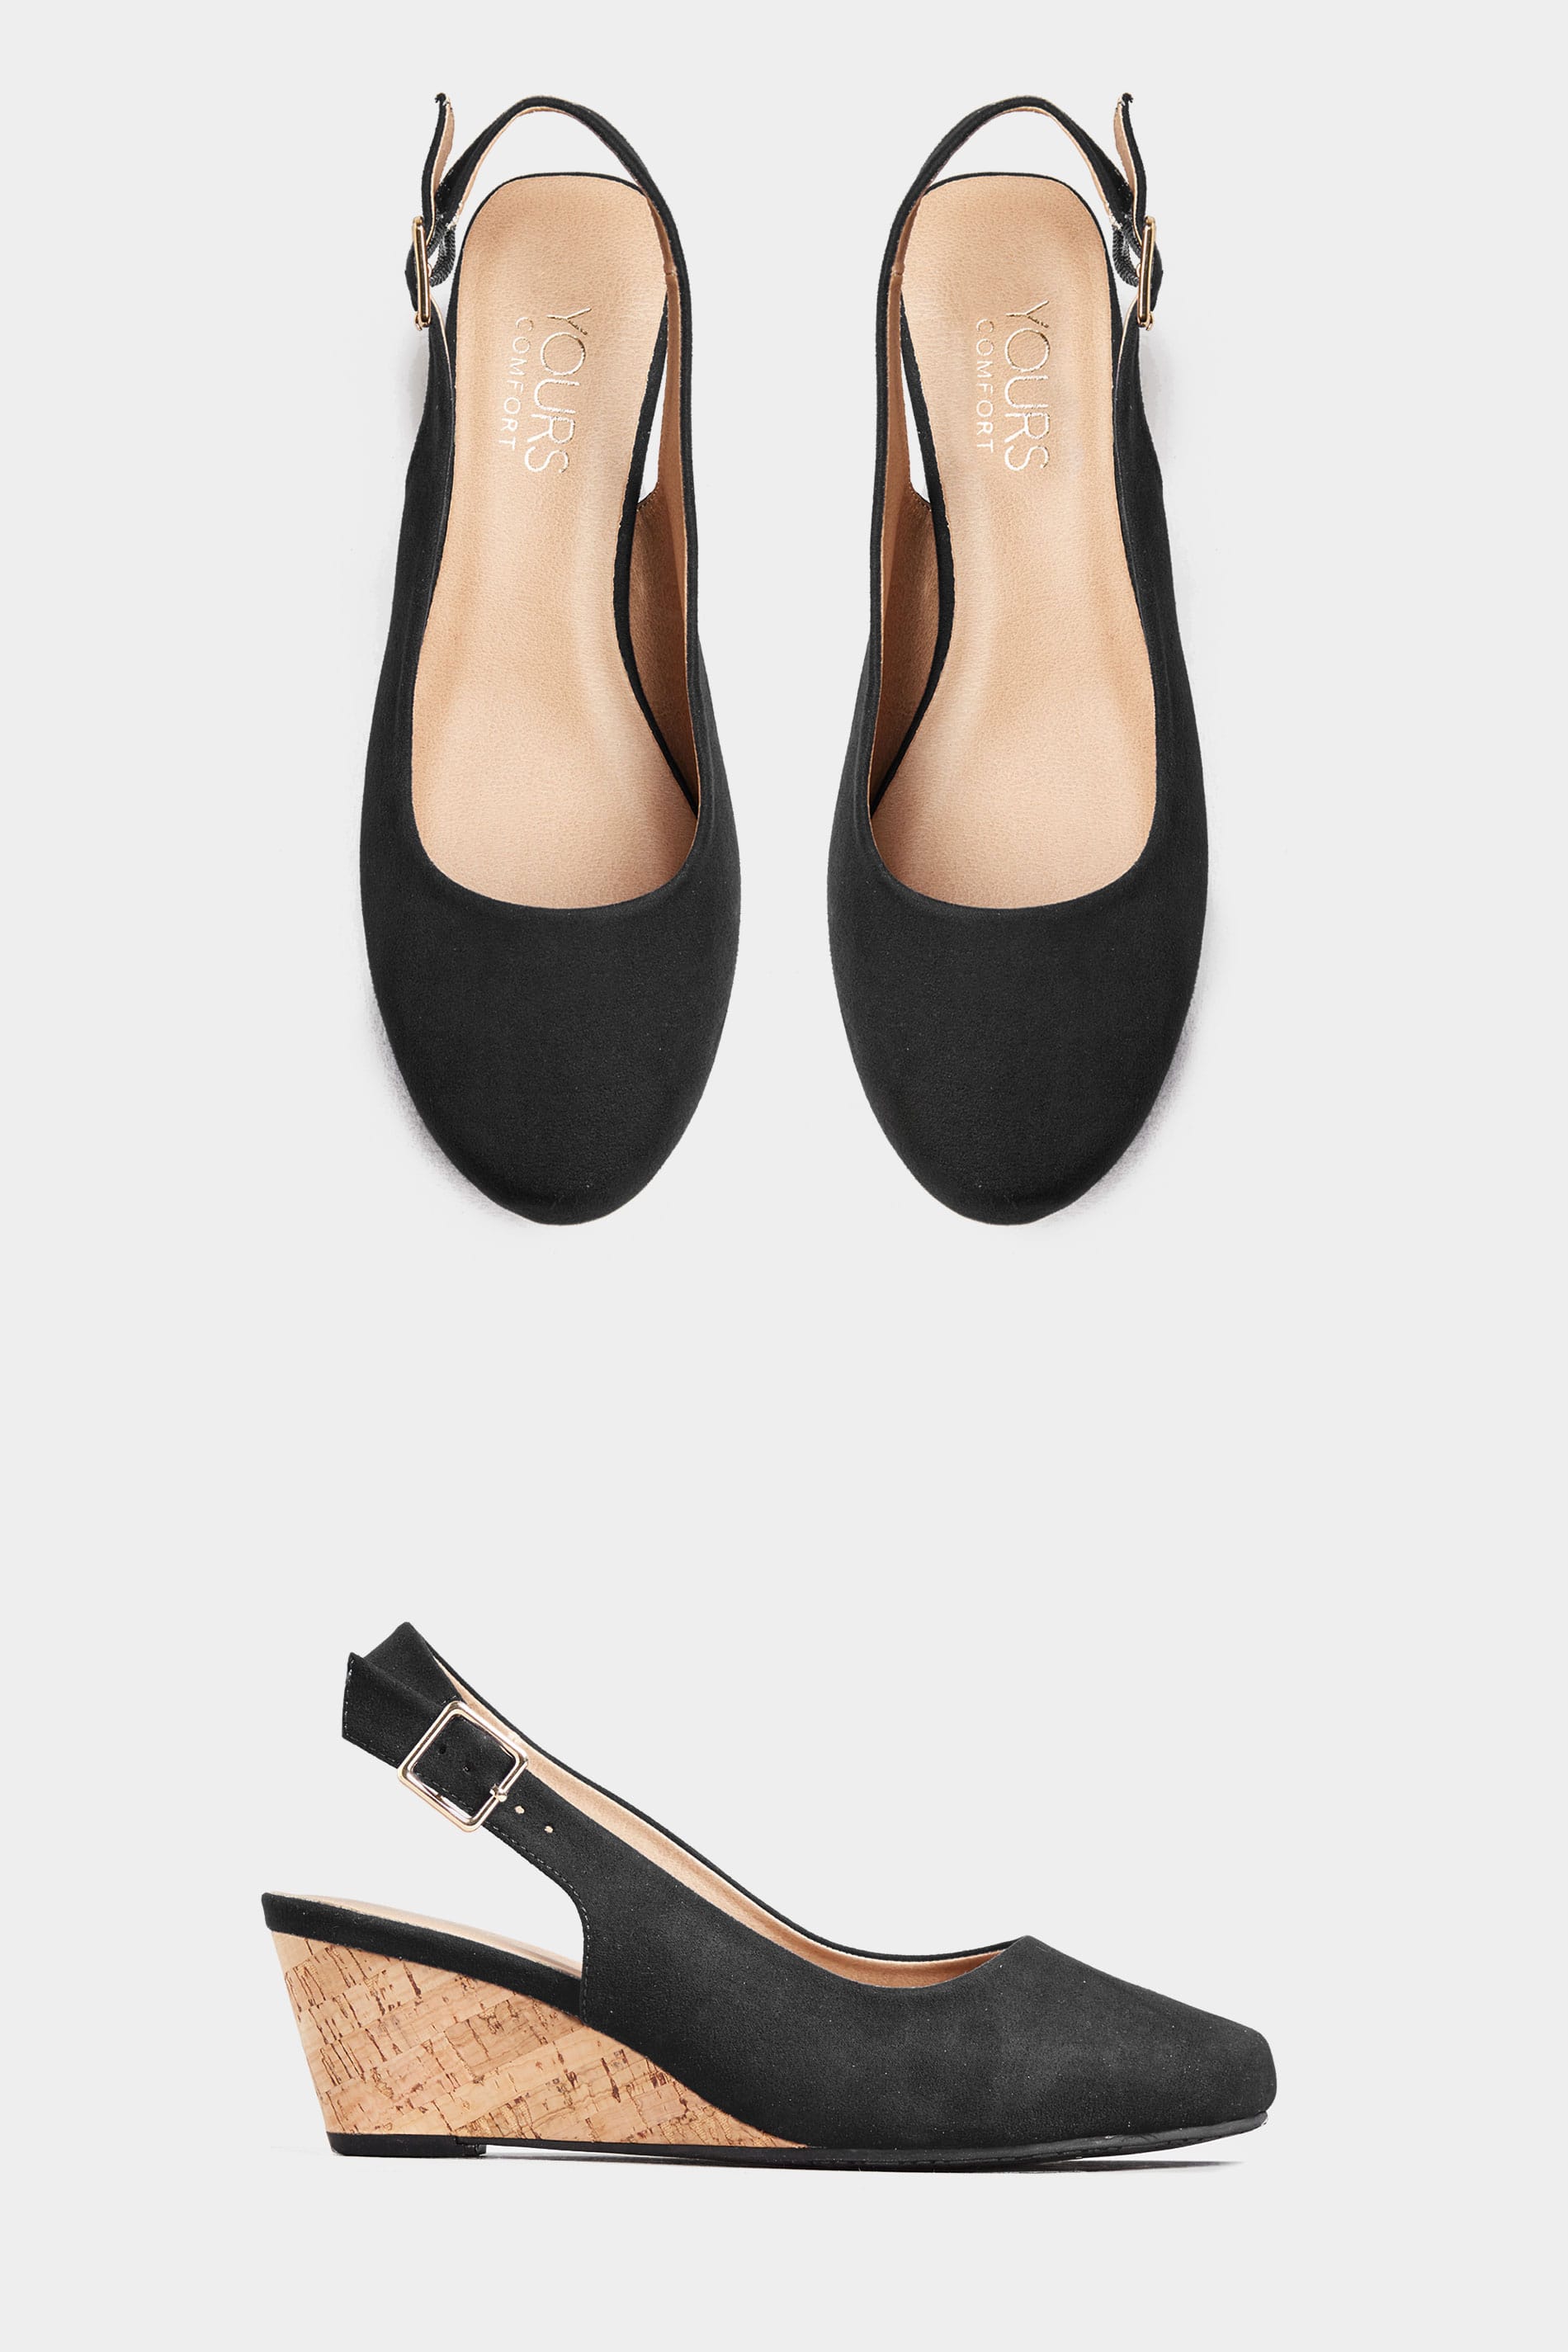 Black Slingback Wedges In Extra Wide 